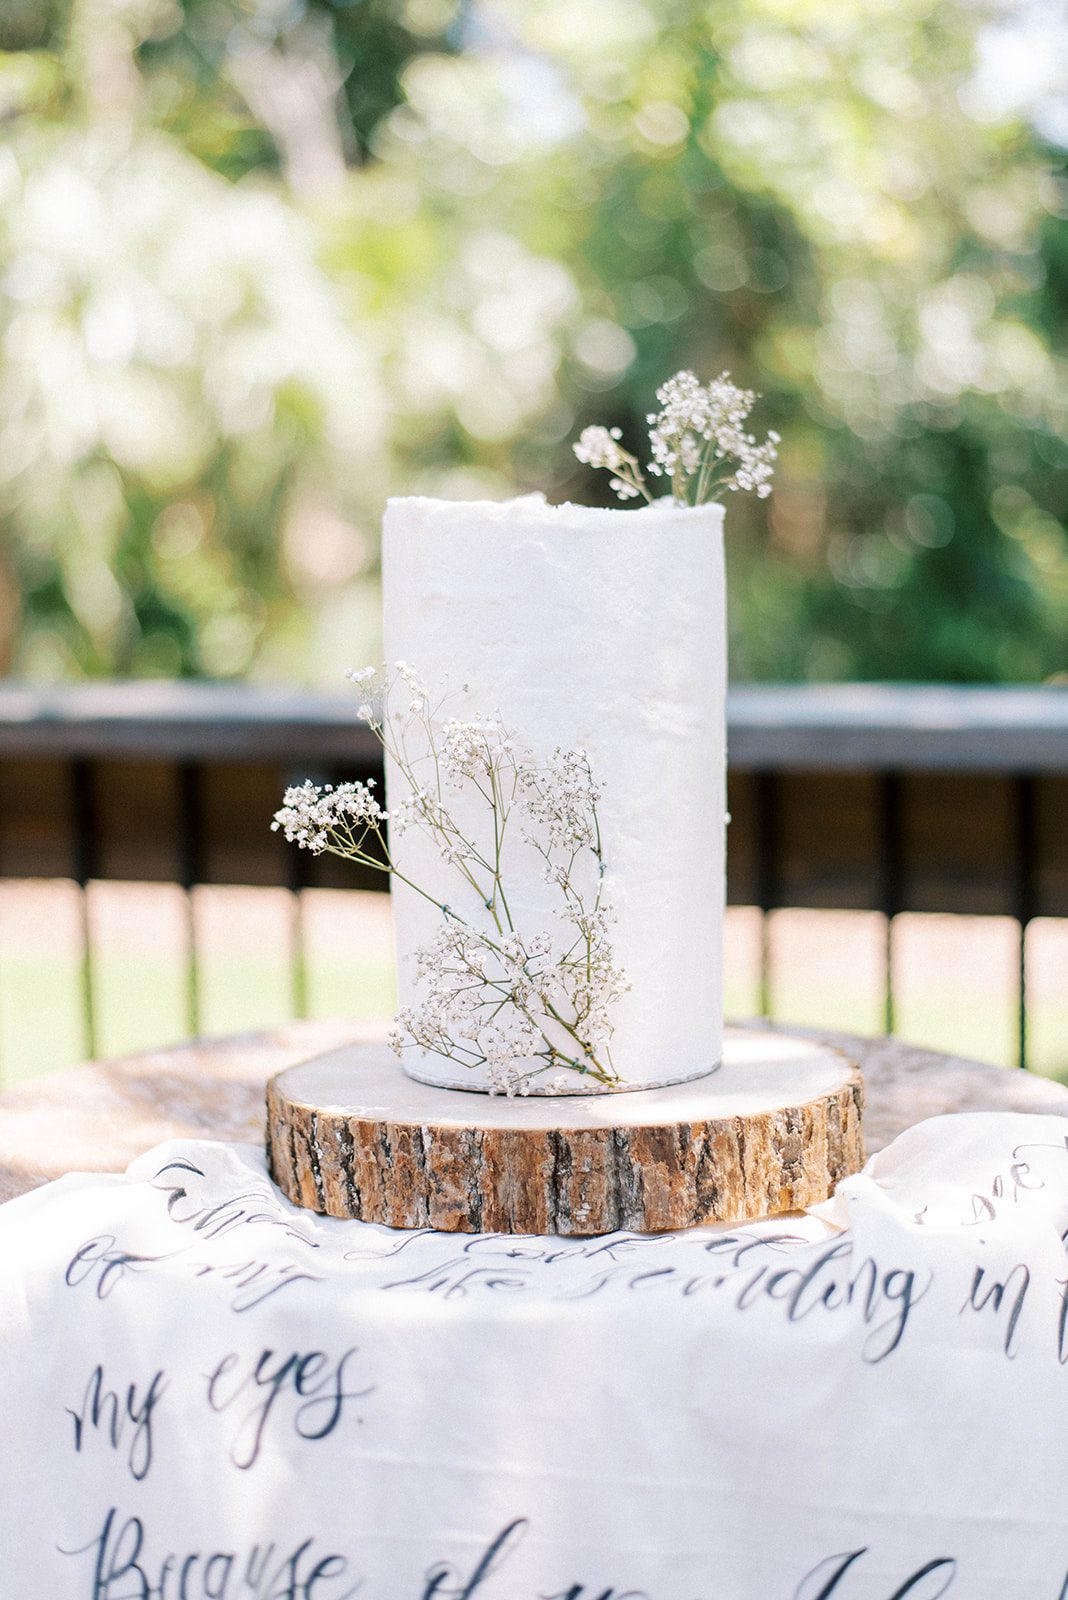 stunning white minimalist wedding cake with small florals on the side on the cake while it sits on a wooden round cake stand and a tapestry underneath